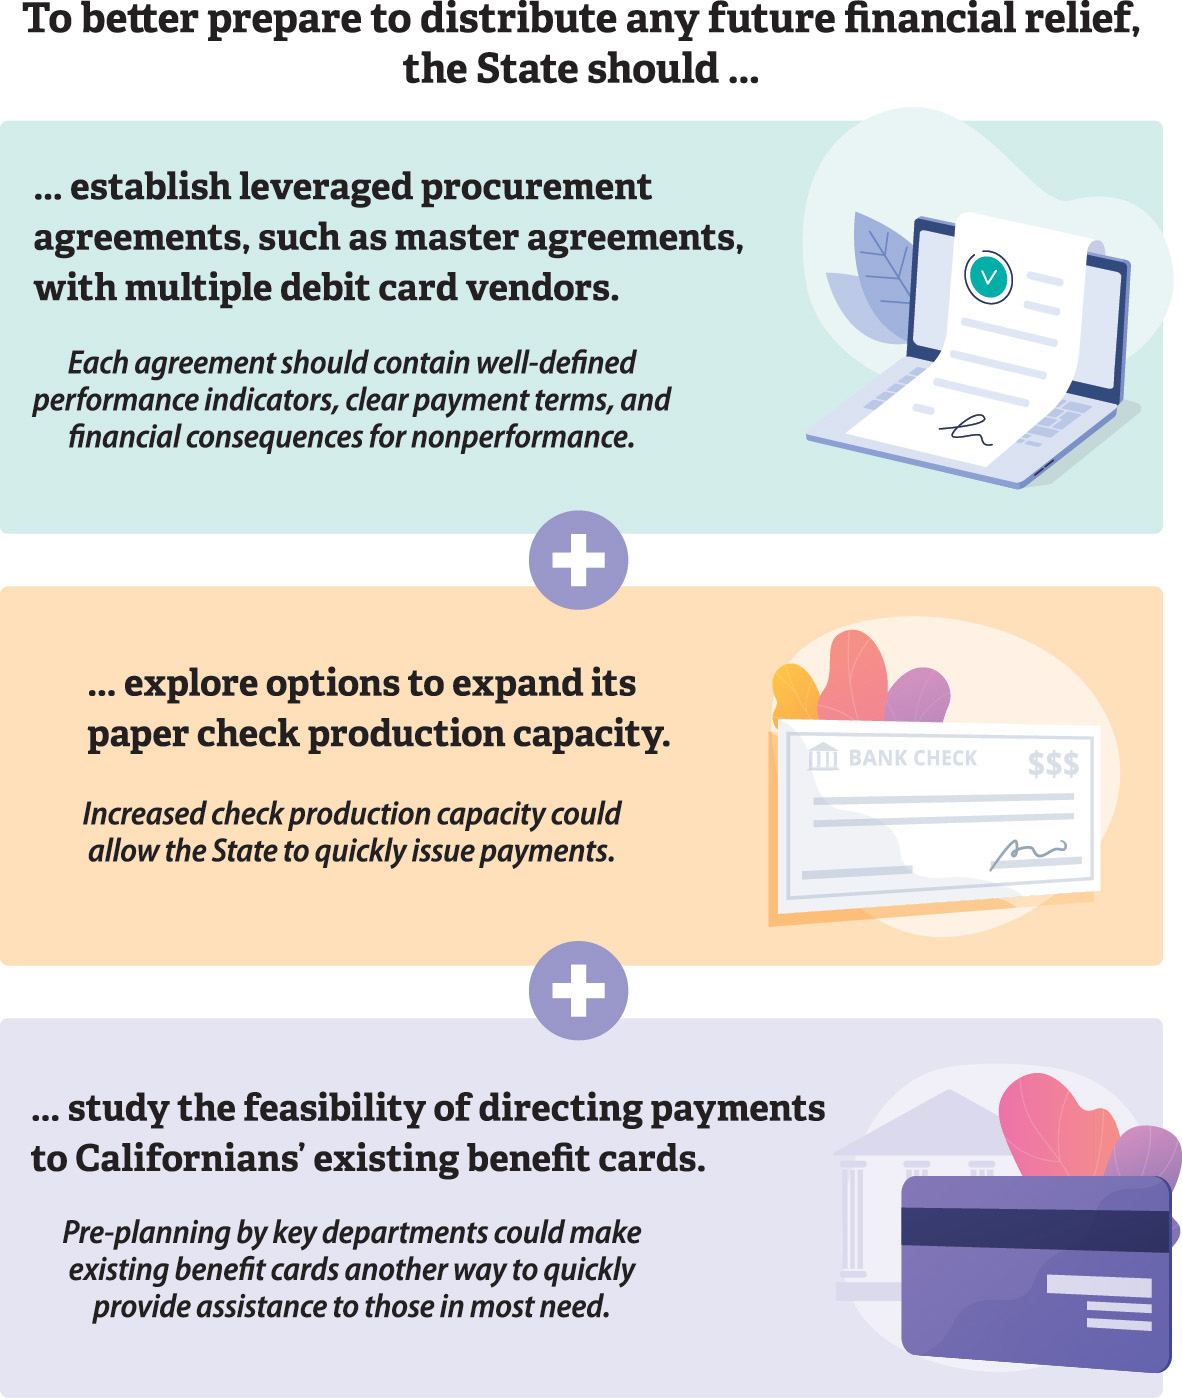 A graphic describing recommended steps that the State should take to prepare for distributing any future financial relief.